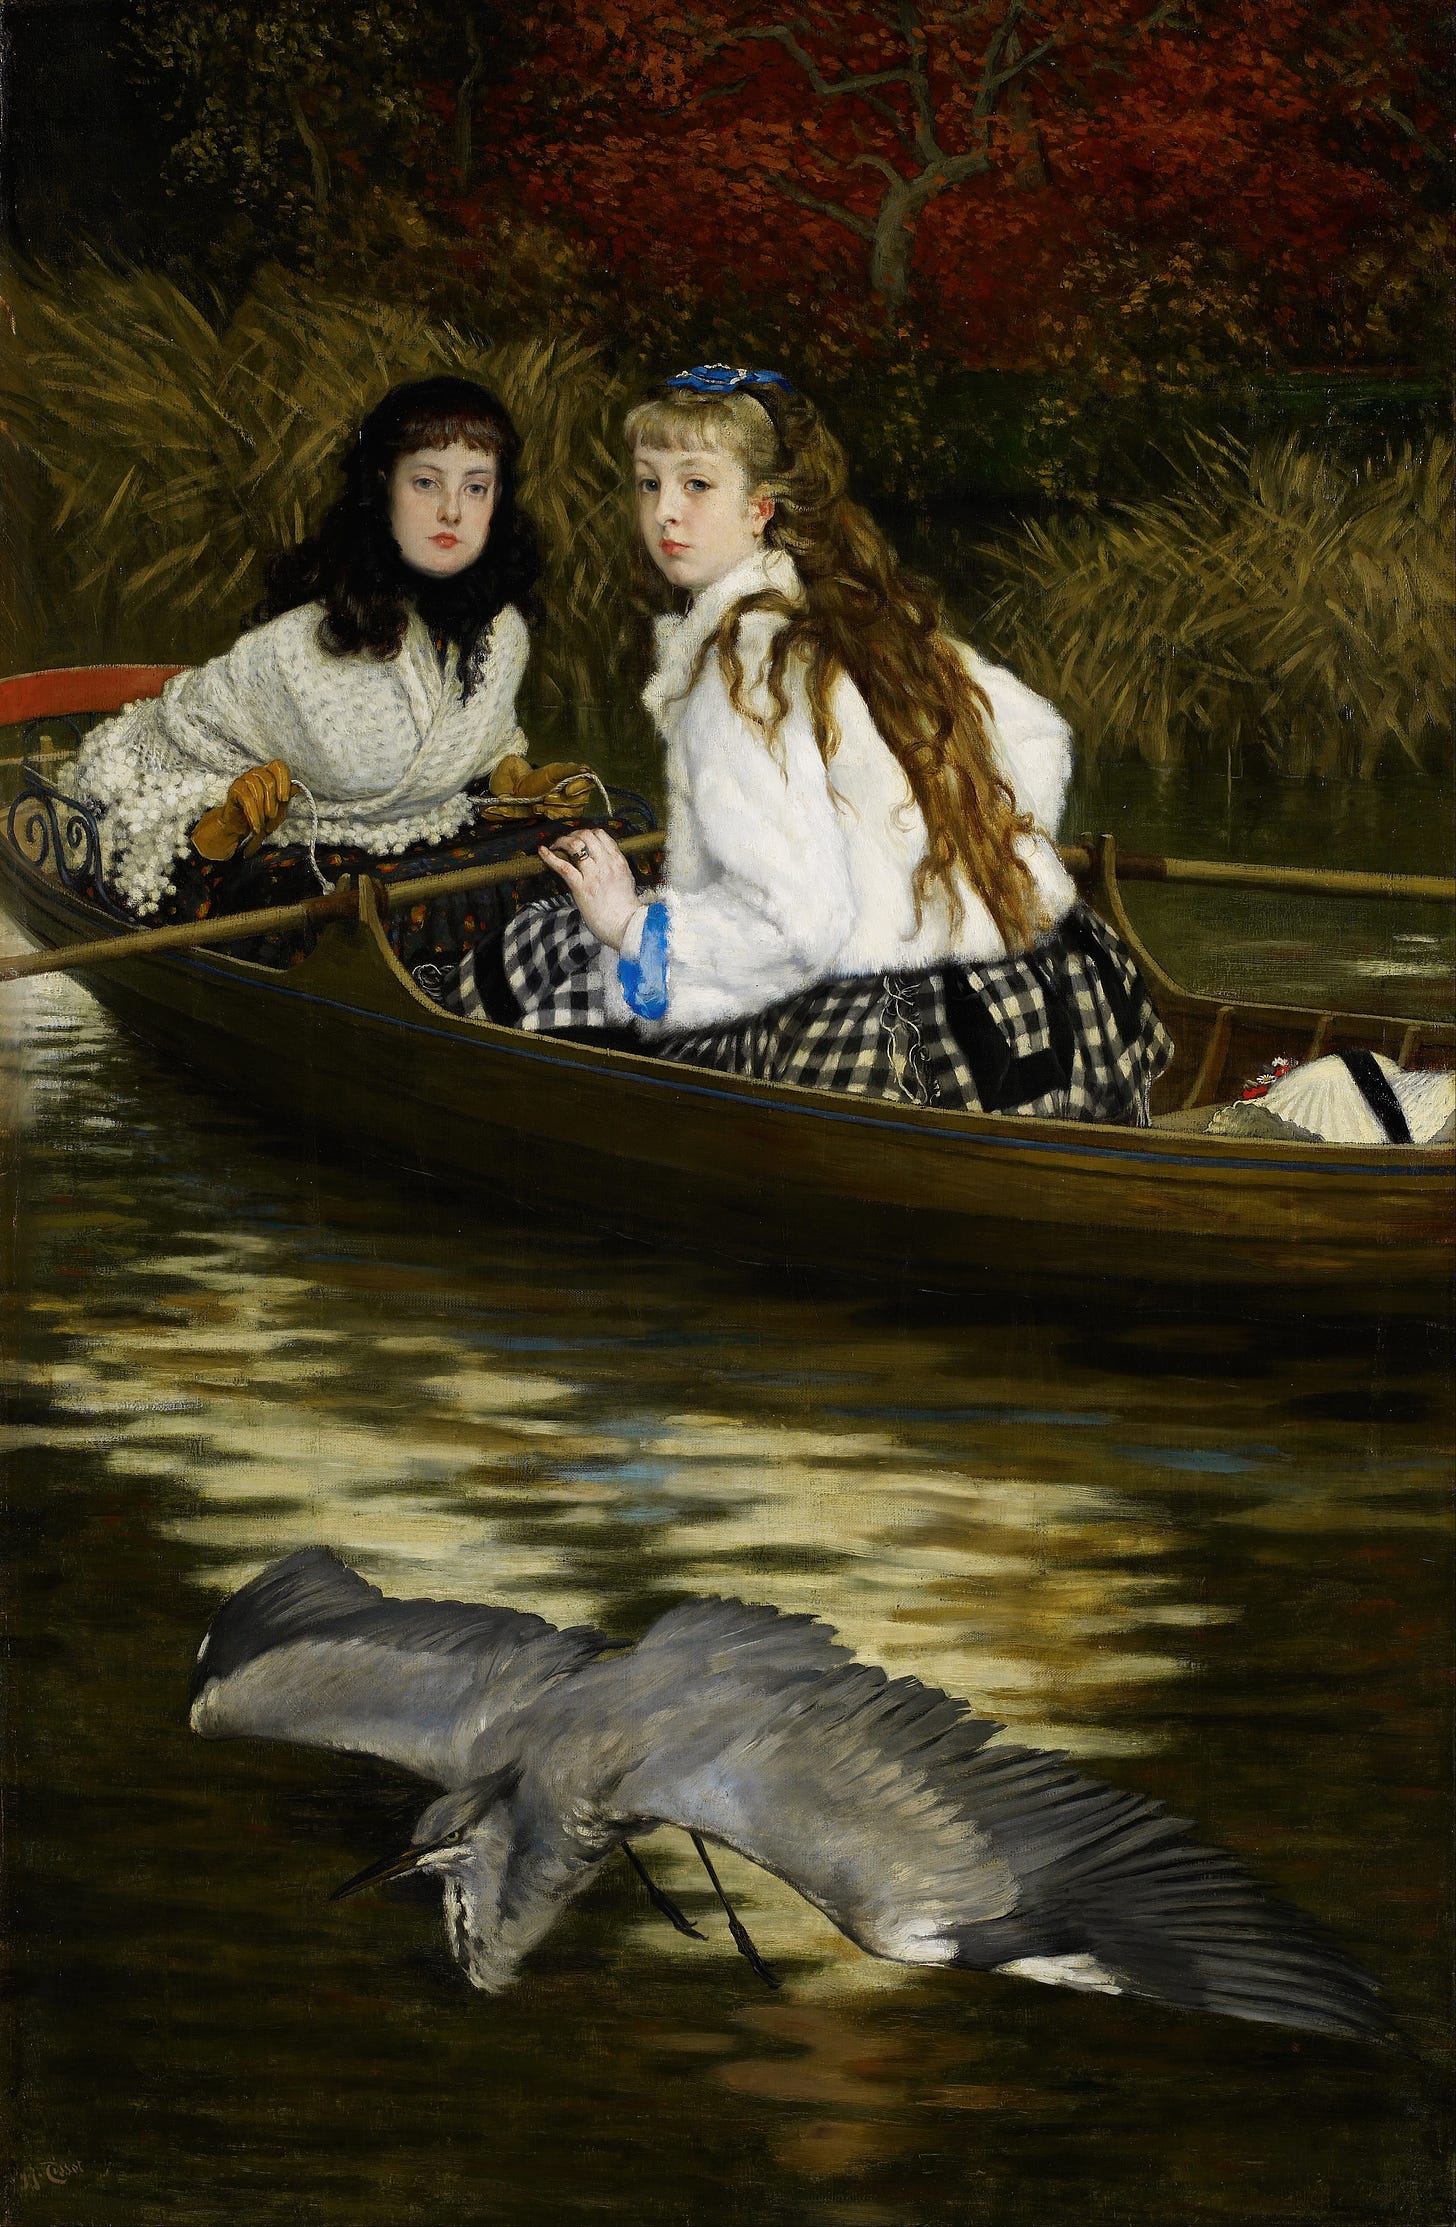 On the Thames, A Heron (1866-1877) by James Tissot